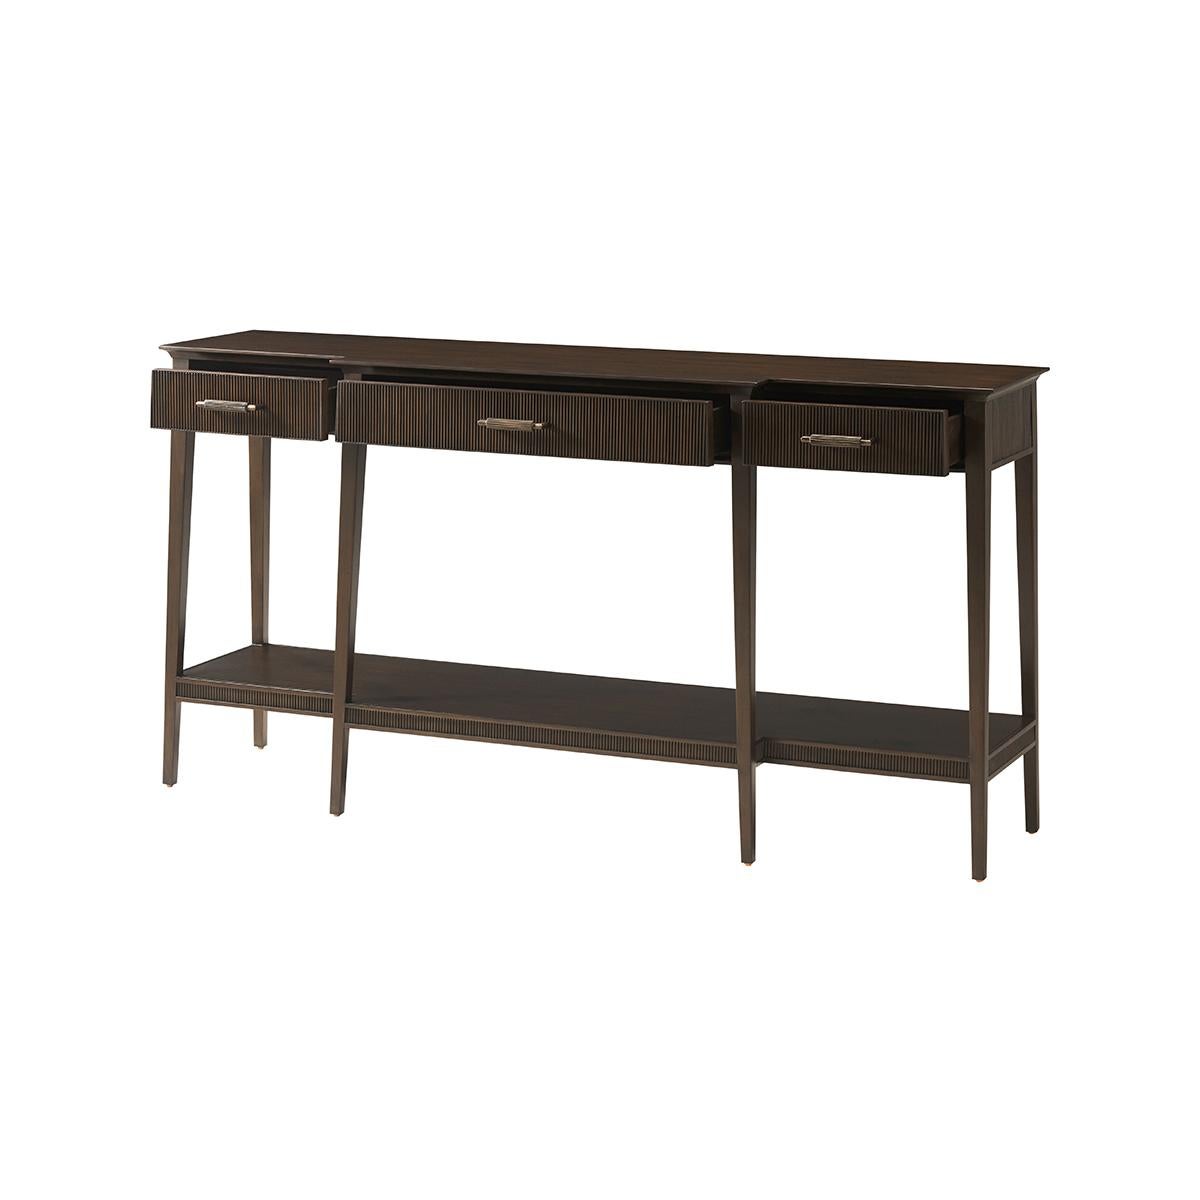 crafted from Prima Vera in our Bistre finish, and features an elegantly tapered silhouette, reeded detailing, three drawers and a shelf. The custom forged hardware, finished in a dark rubbed bronze, echoes the reeded details throughout.

Dimensions: